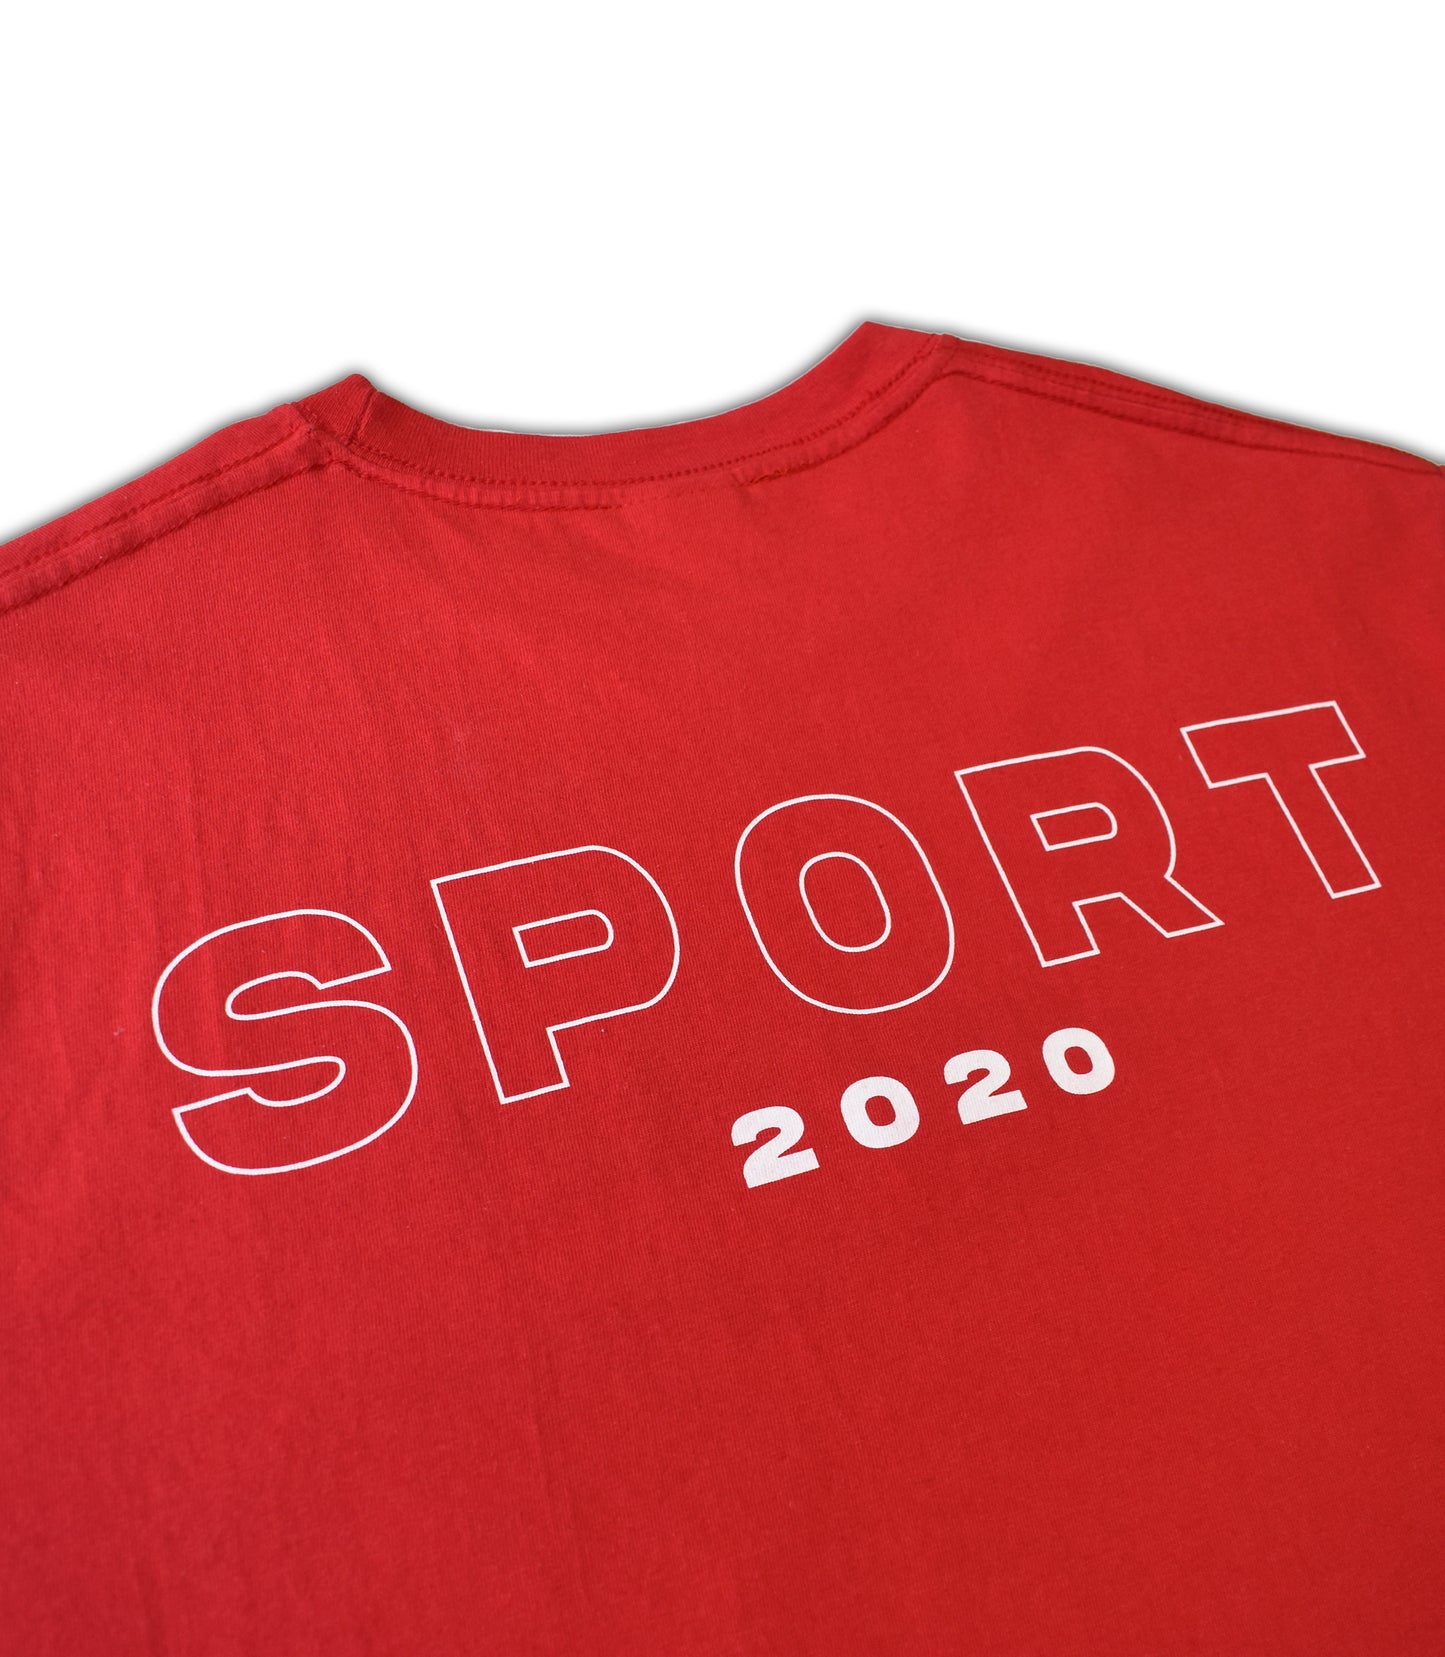 Red SPORT tee